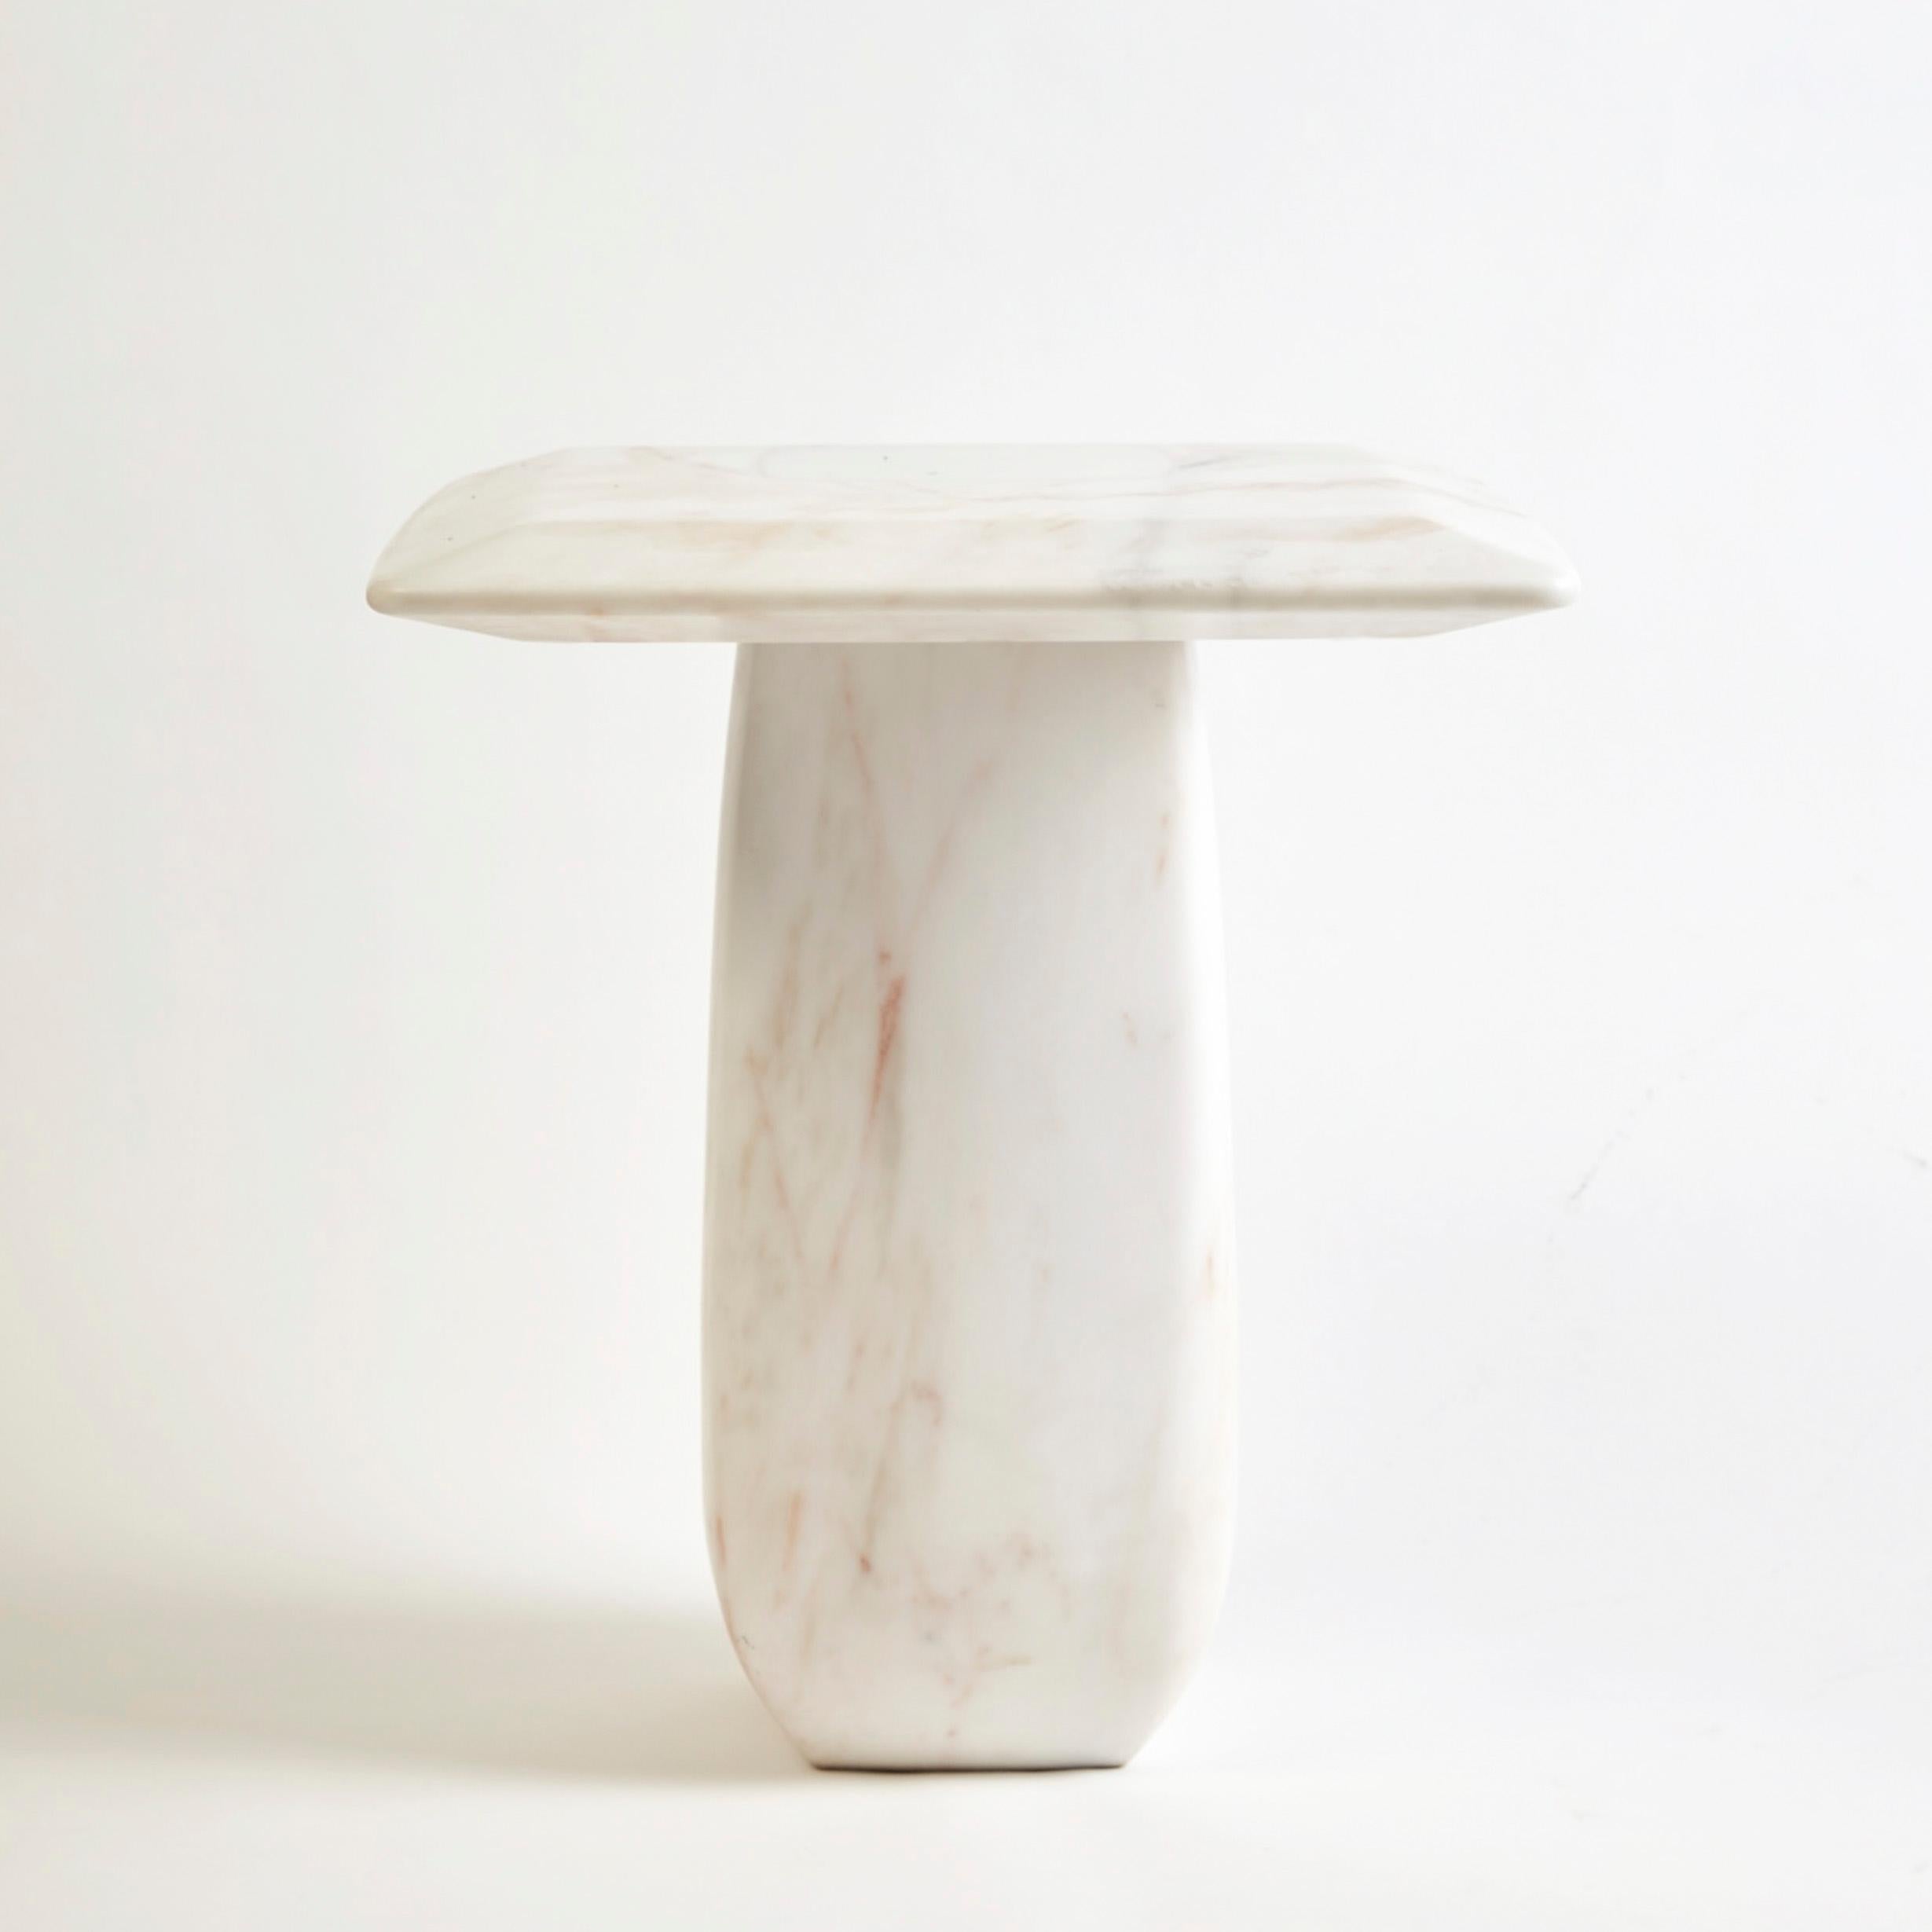 Marble Bossa Side Table by DUISTT 
Dimensions: W 40 x D 40 x H 47 cm
Materials: Estremoz Marble

The Bossa marble side table, crafted with great attention to details, is inspired by the subtlety, particular charm and harmonious simplicity of the